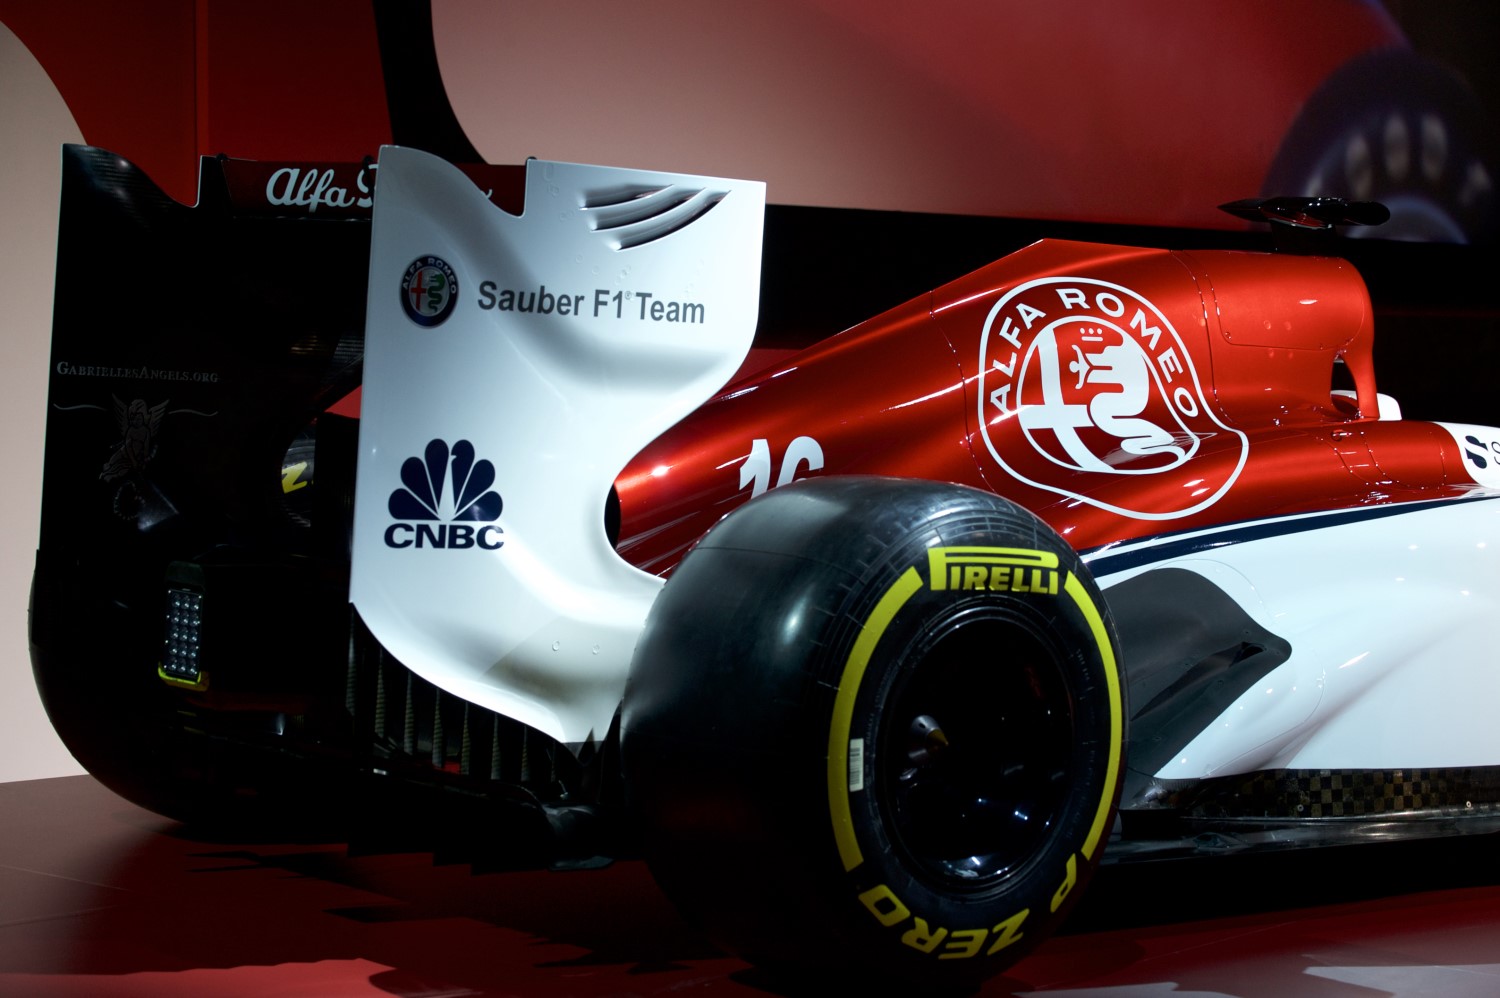 Alfa Romeo is very prominent on the car